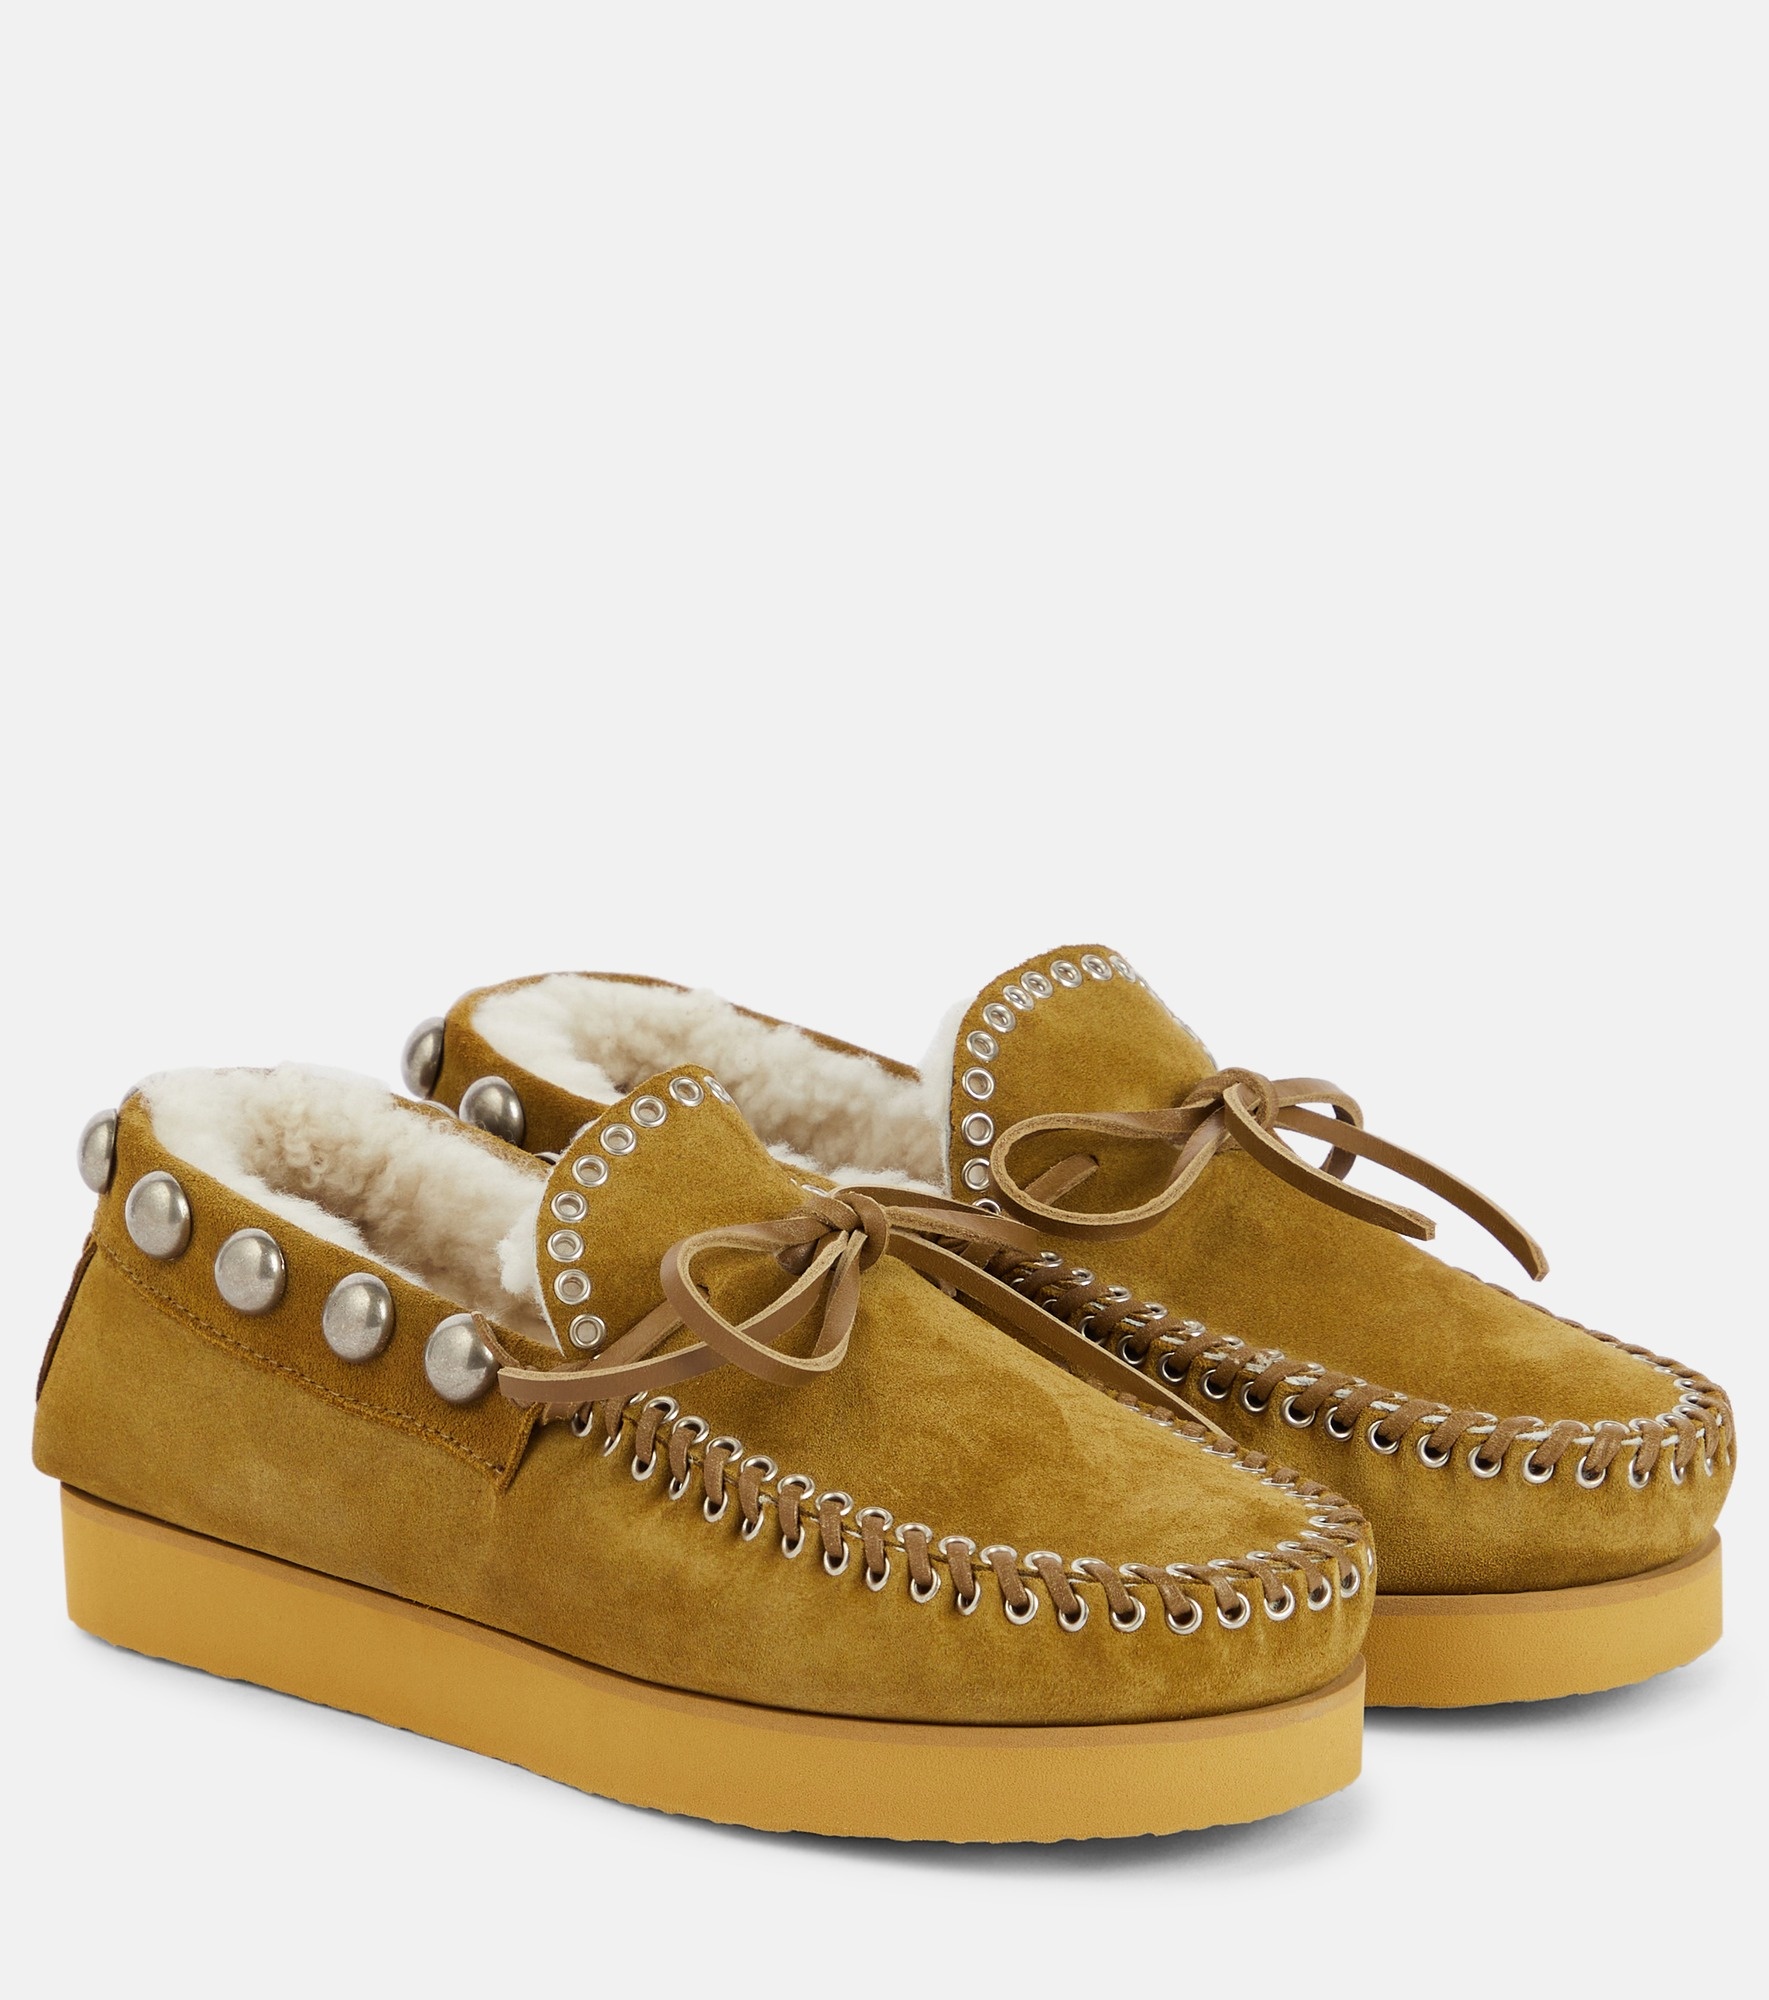 Forley shearling-lined suede moccasins - 1